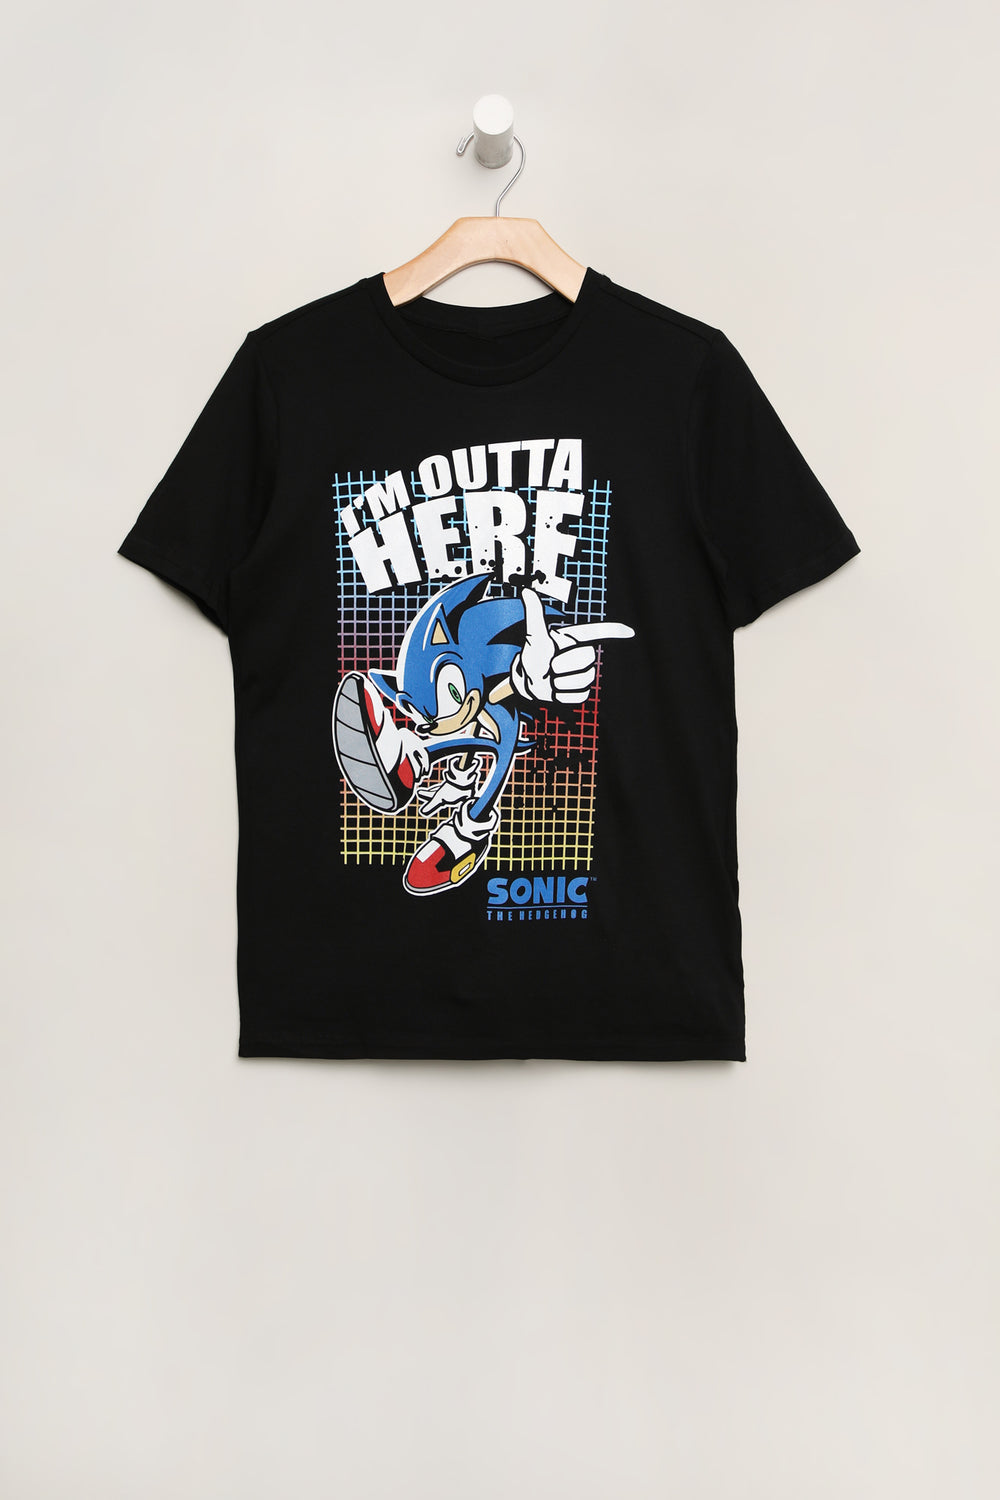 T-Shirt Imprimé I'm Outta Here Sonic The Hedgehog Junior T-Shirt Imprimé I'm Outta Here Sonic The Hedgehog Junior